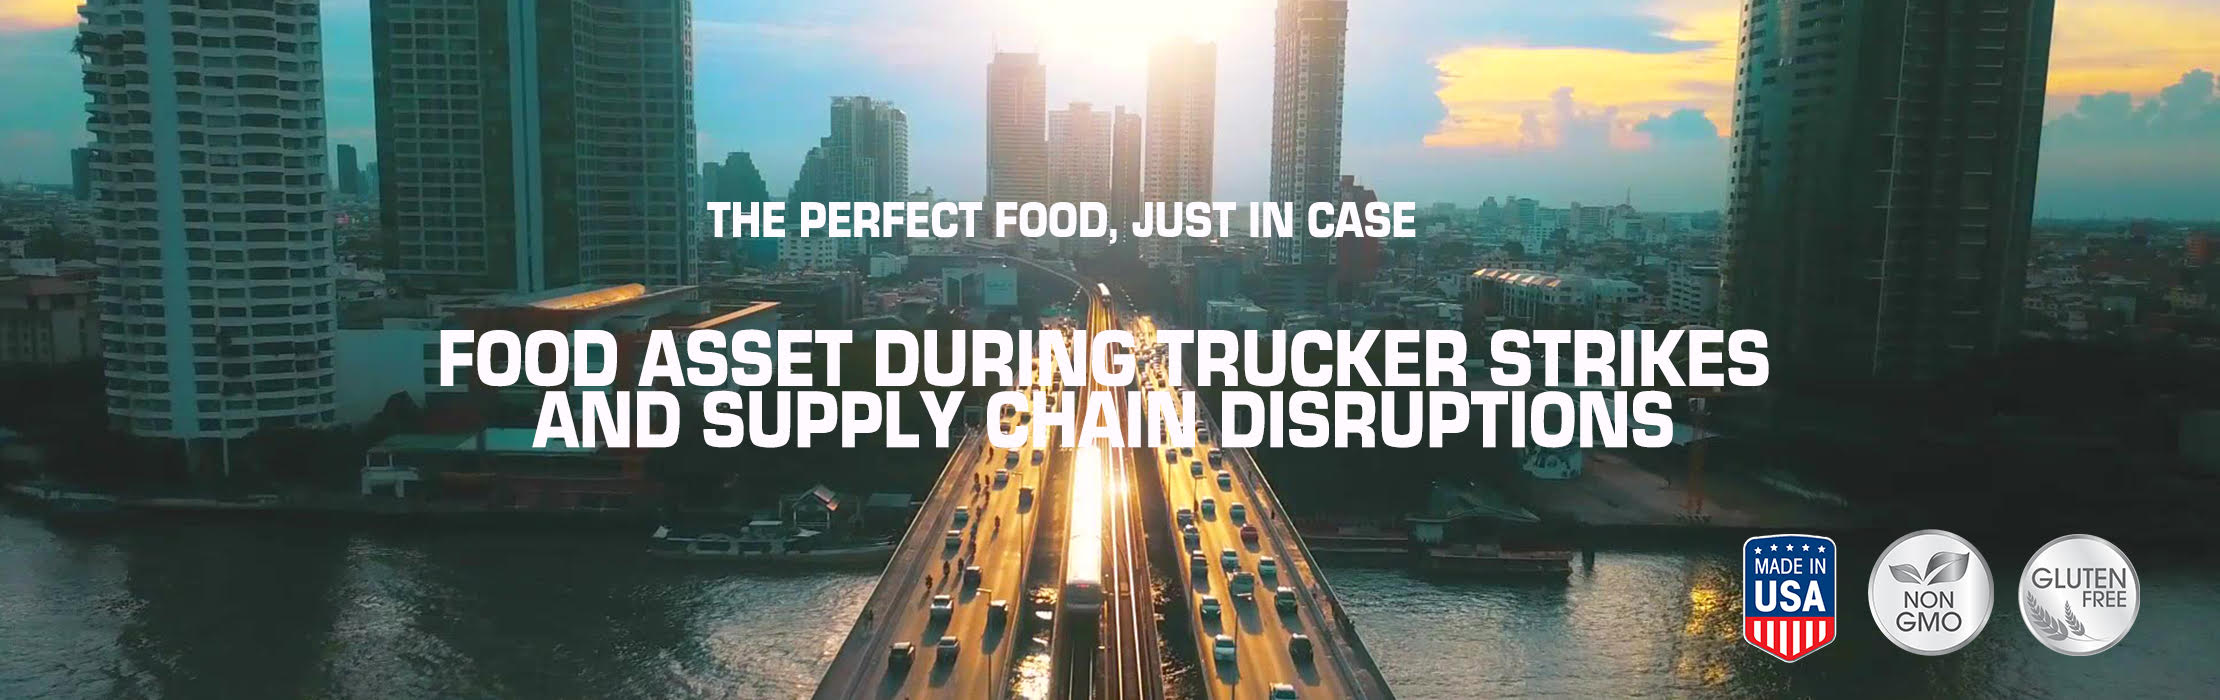 Food Asset During Trucker Strikes and Supply Chain Disruptions